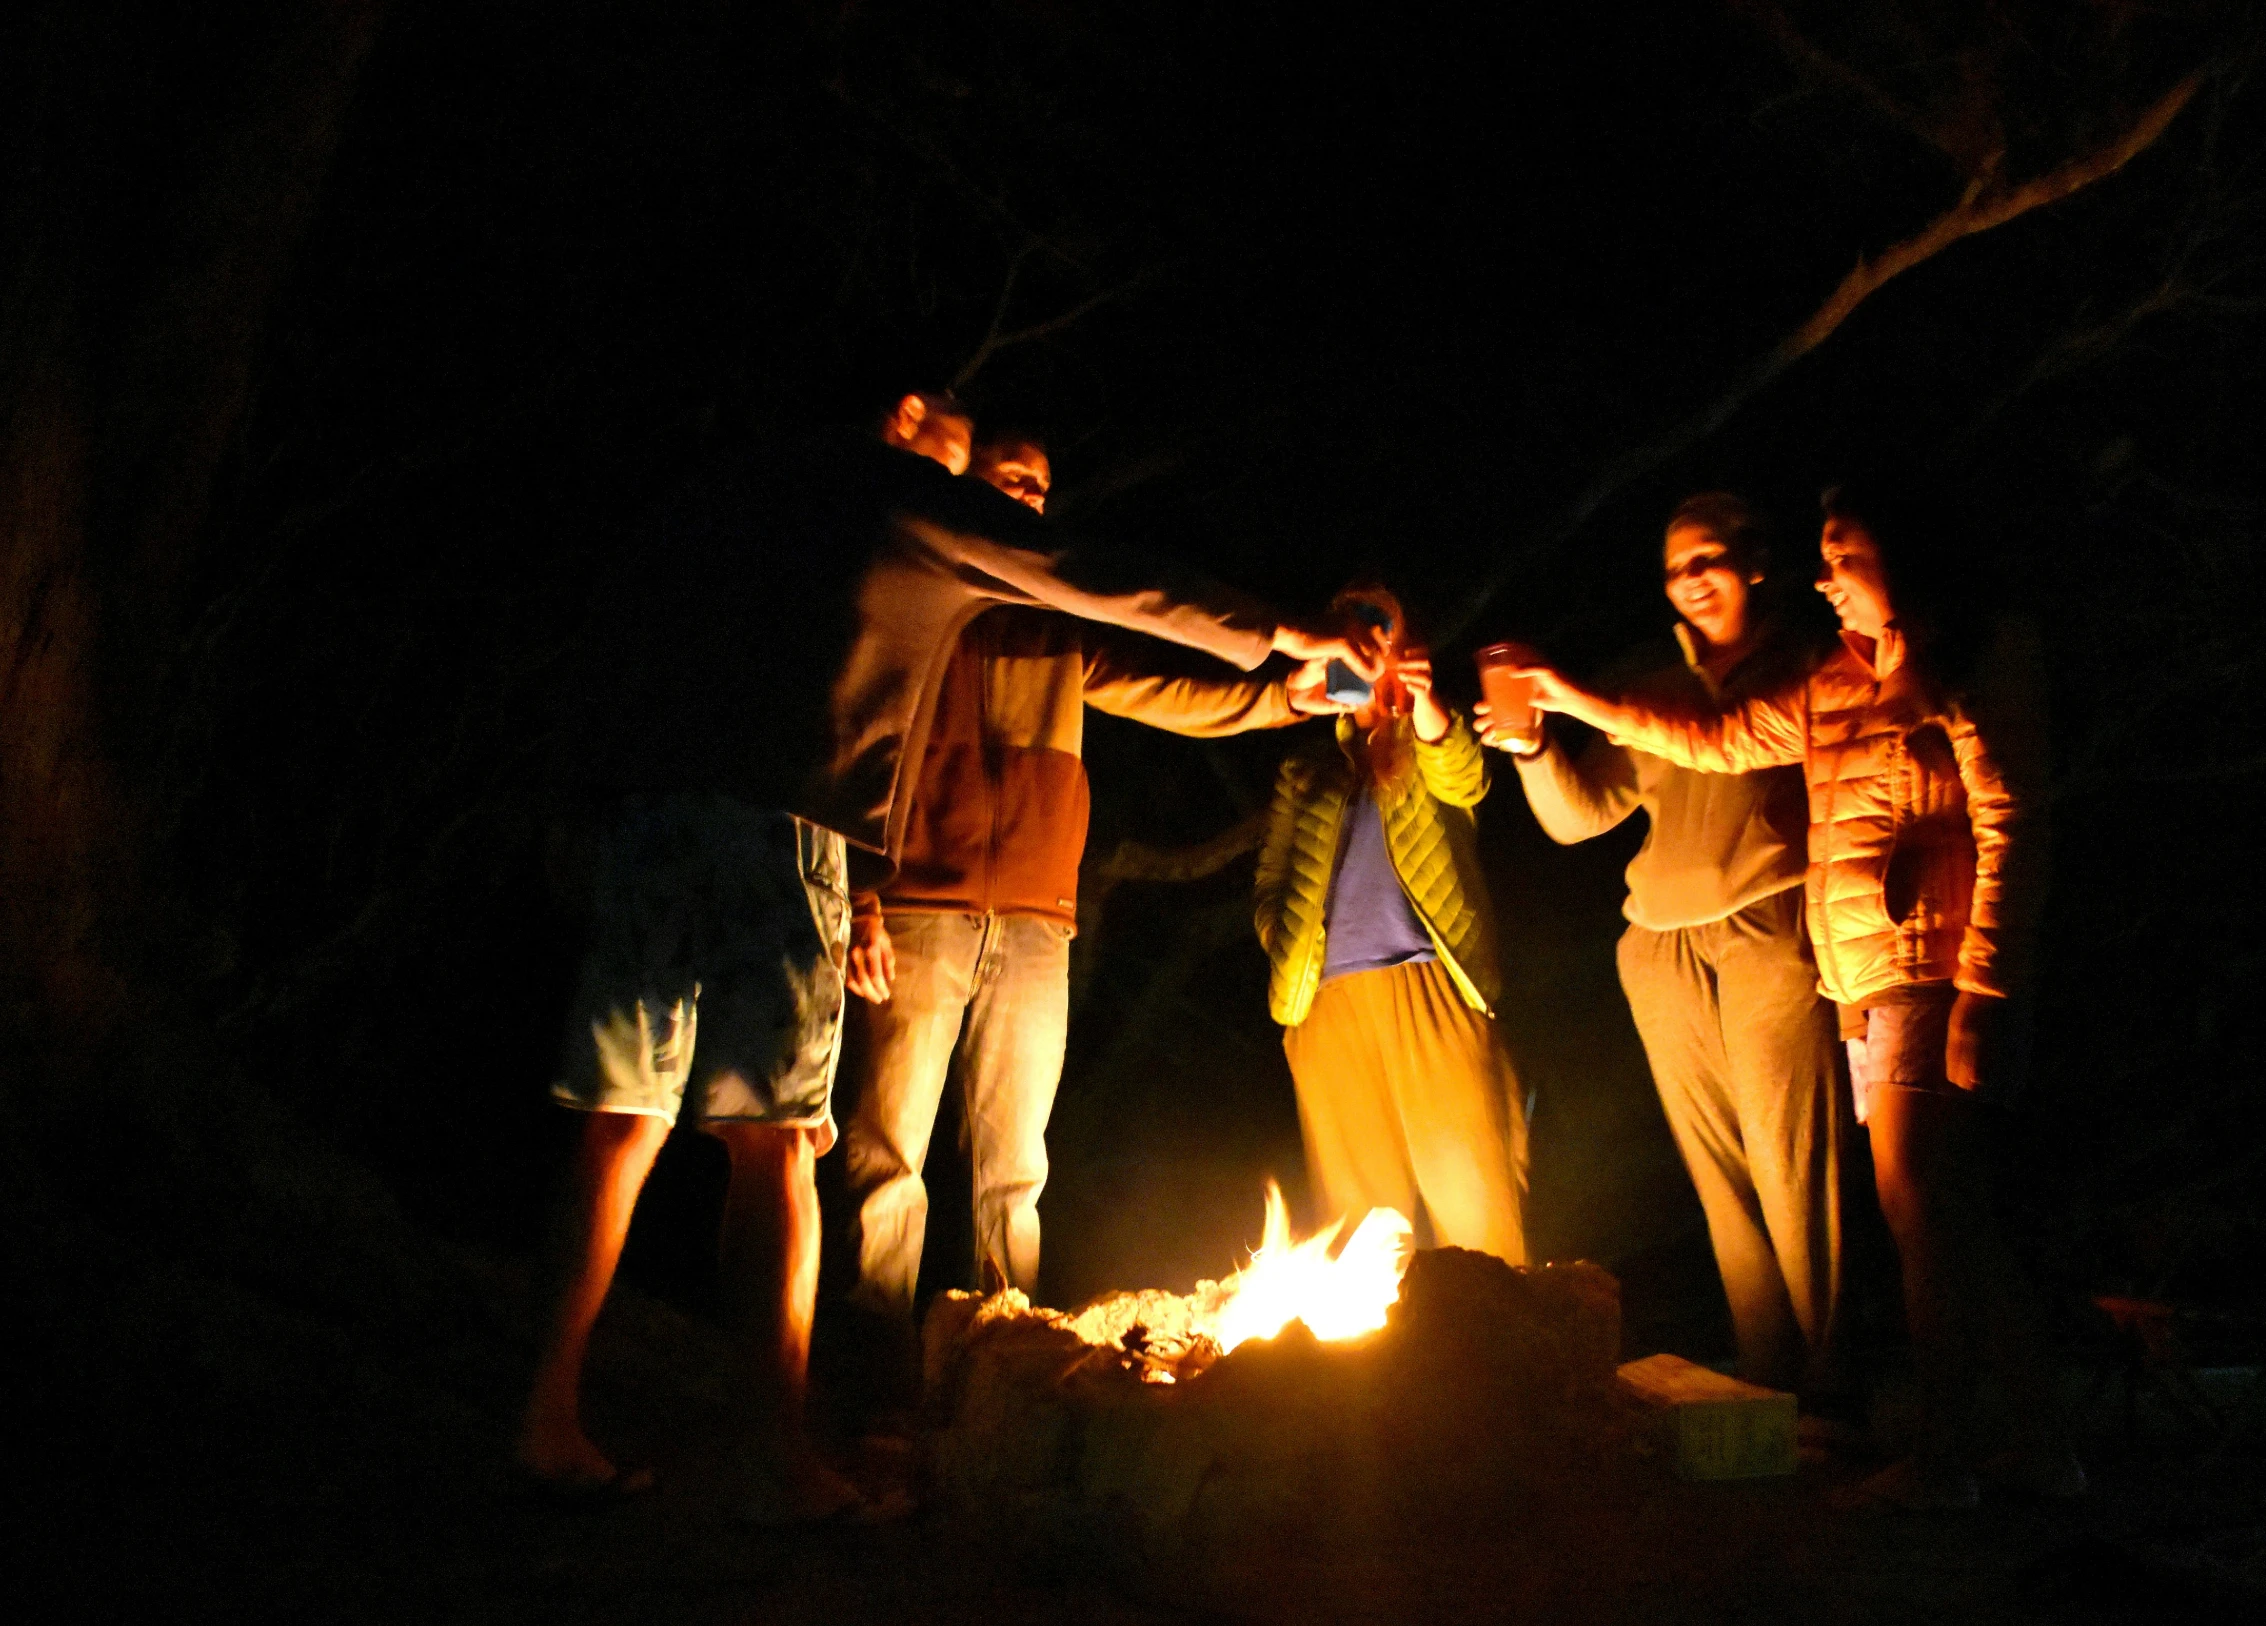 four people toasting by the fire in the dark